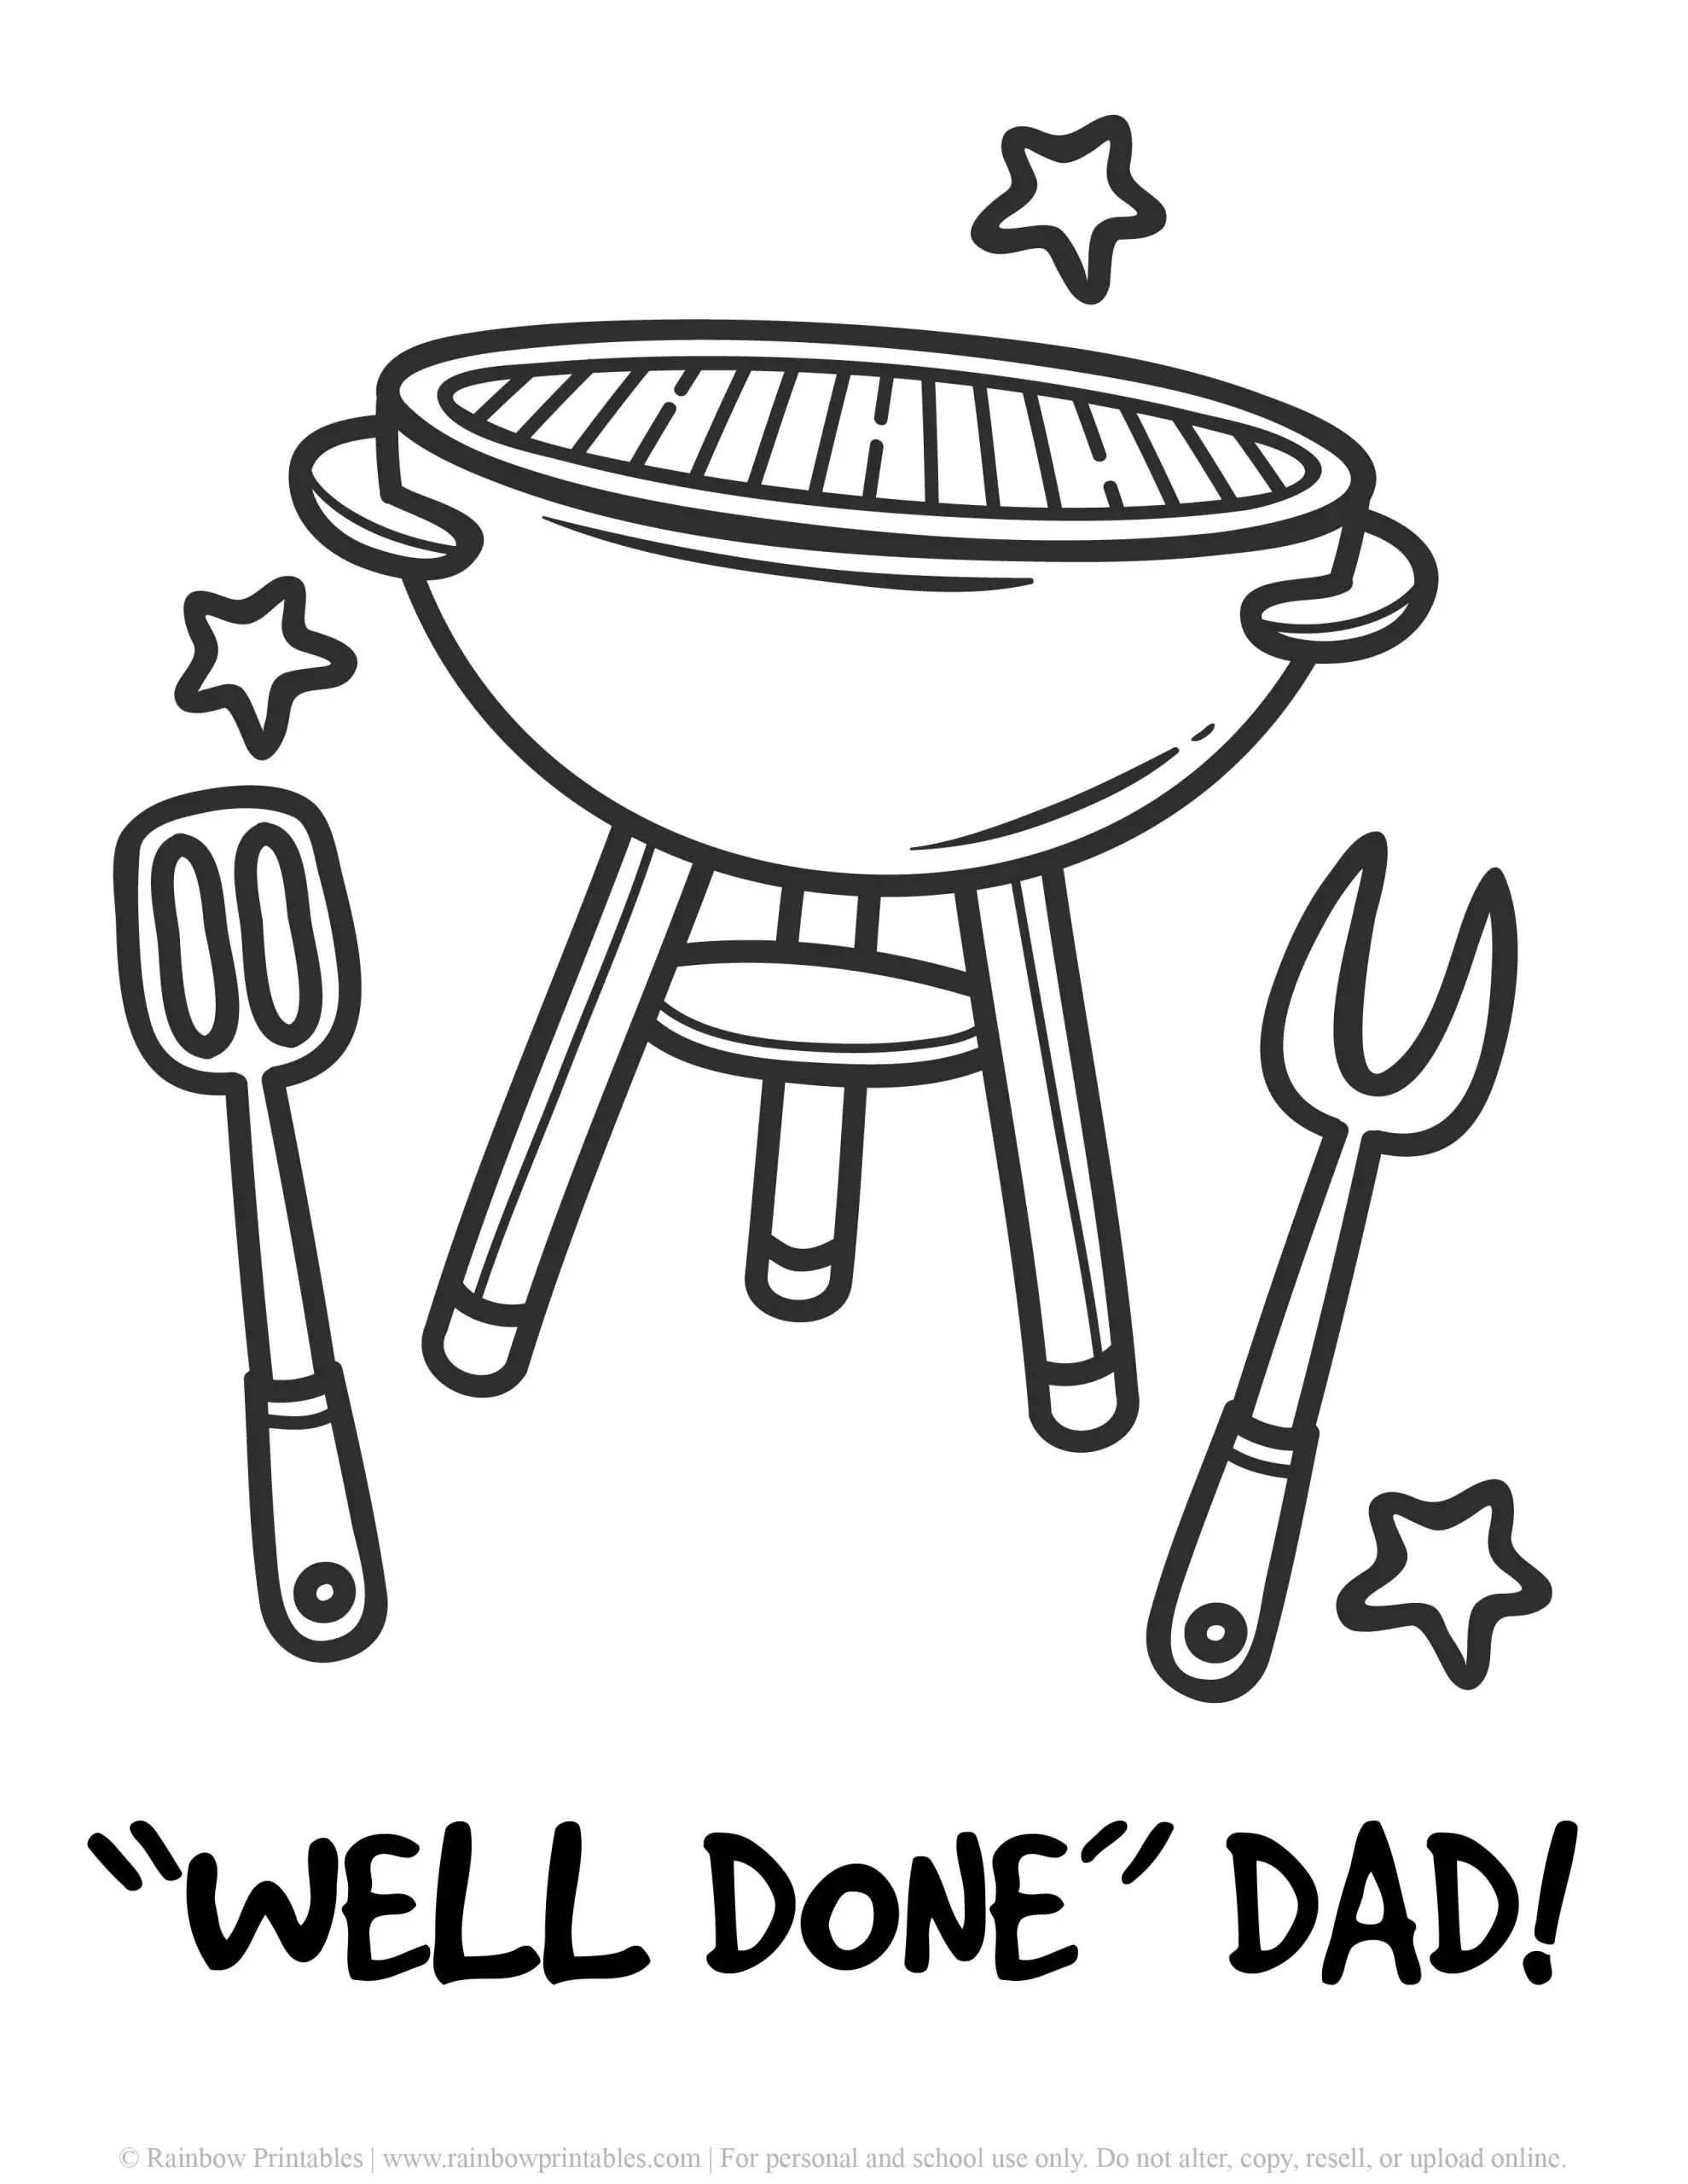 Father's Day Punny Cards & Coloring Pages Printable BBQ Grill Best DAD on the Block BBQ Puns for Fathers Funny Dorky Pun Dad Jokes Coloring Activity